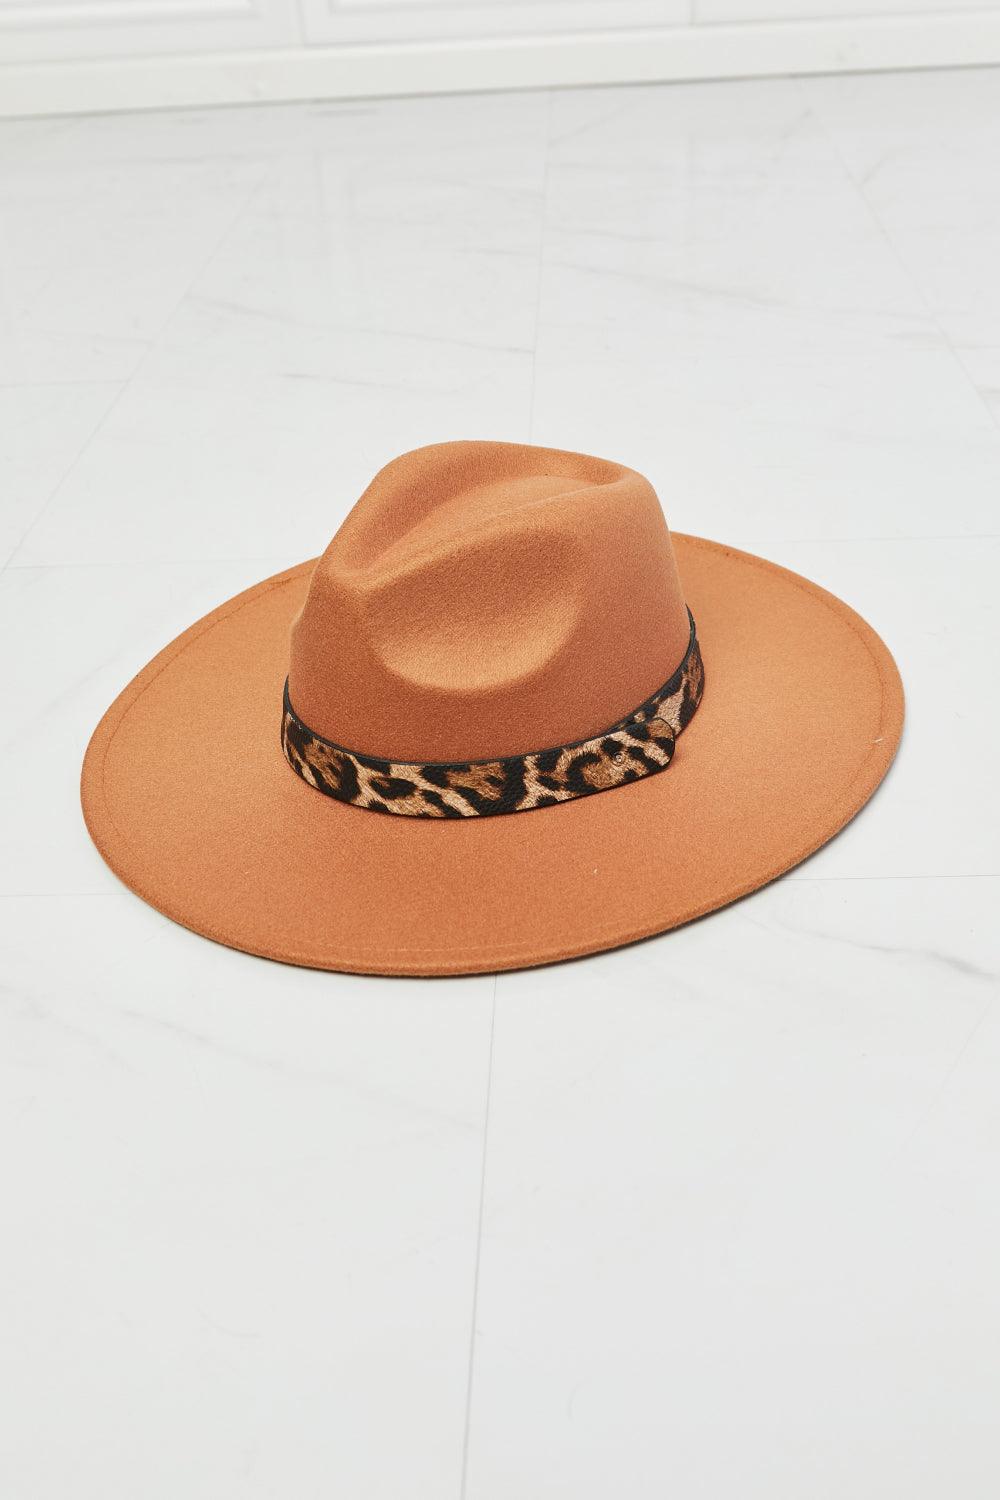 Fame In The Wild Leopard Detail Fedora Hat - Lecatta